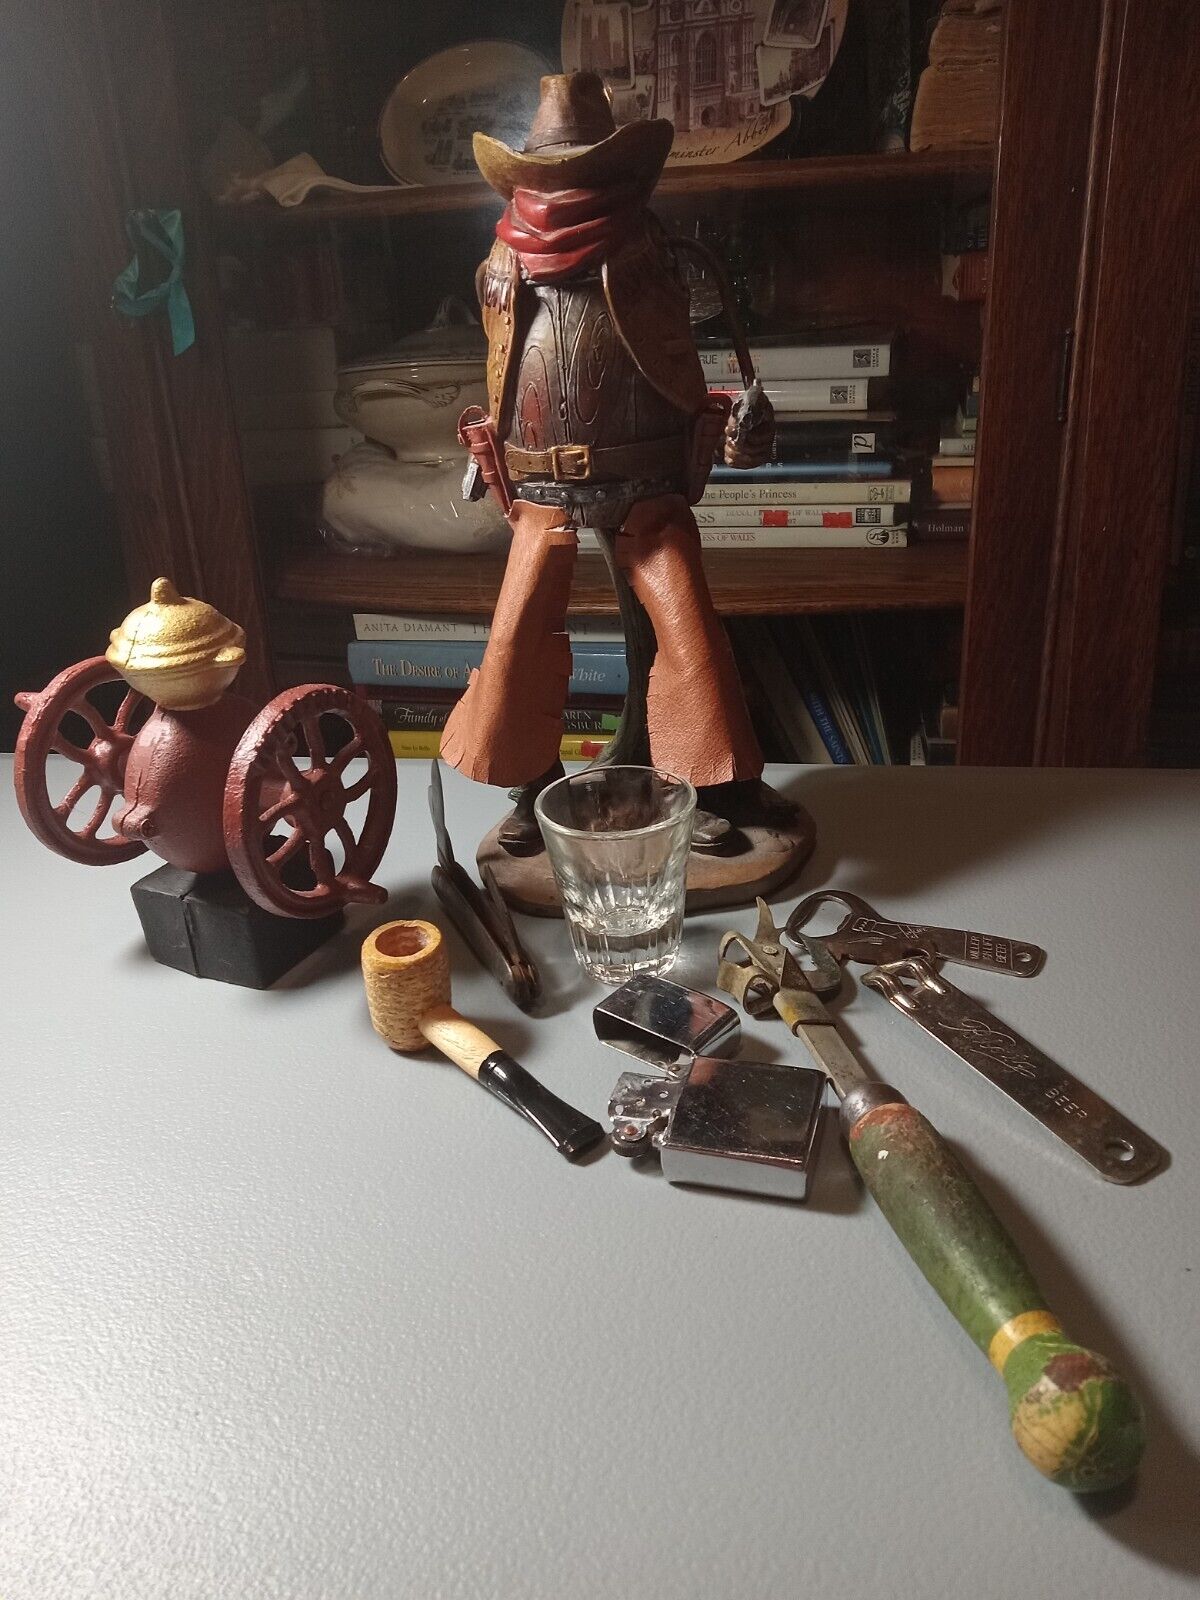 Lot Estate Sale Find ALL ITEMS IN EXCELLENT CONDITION